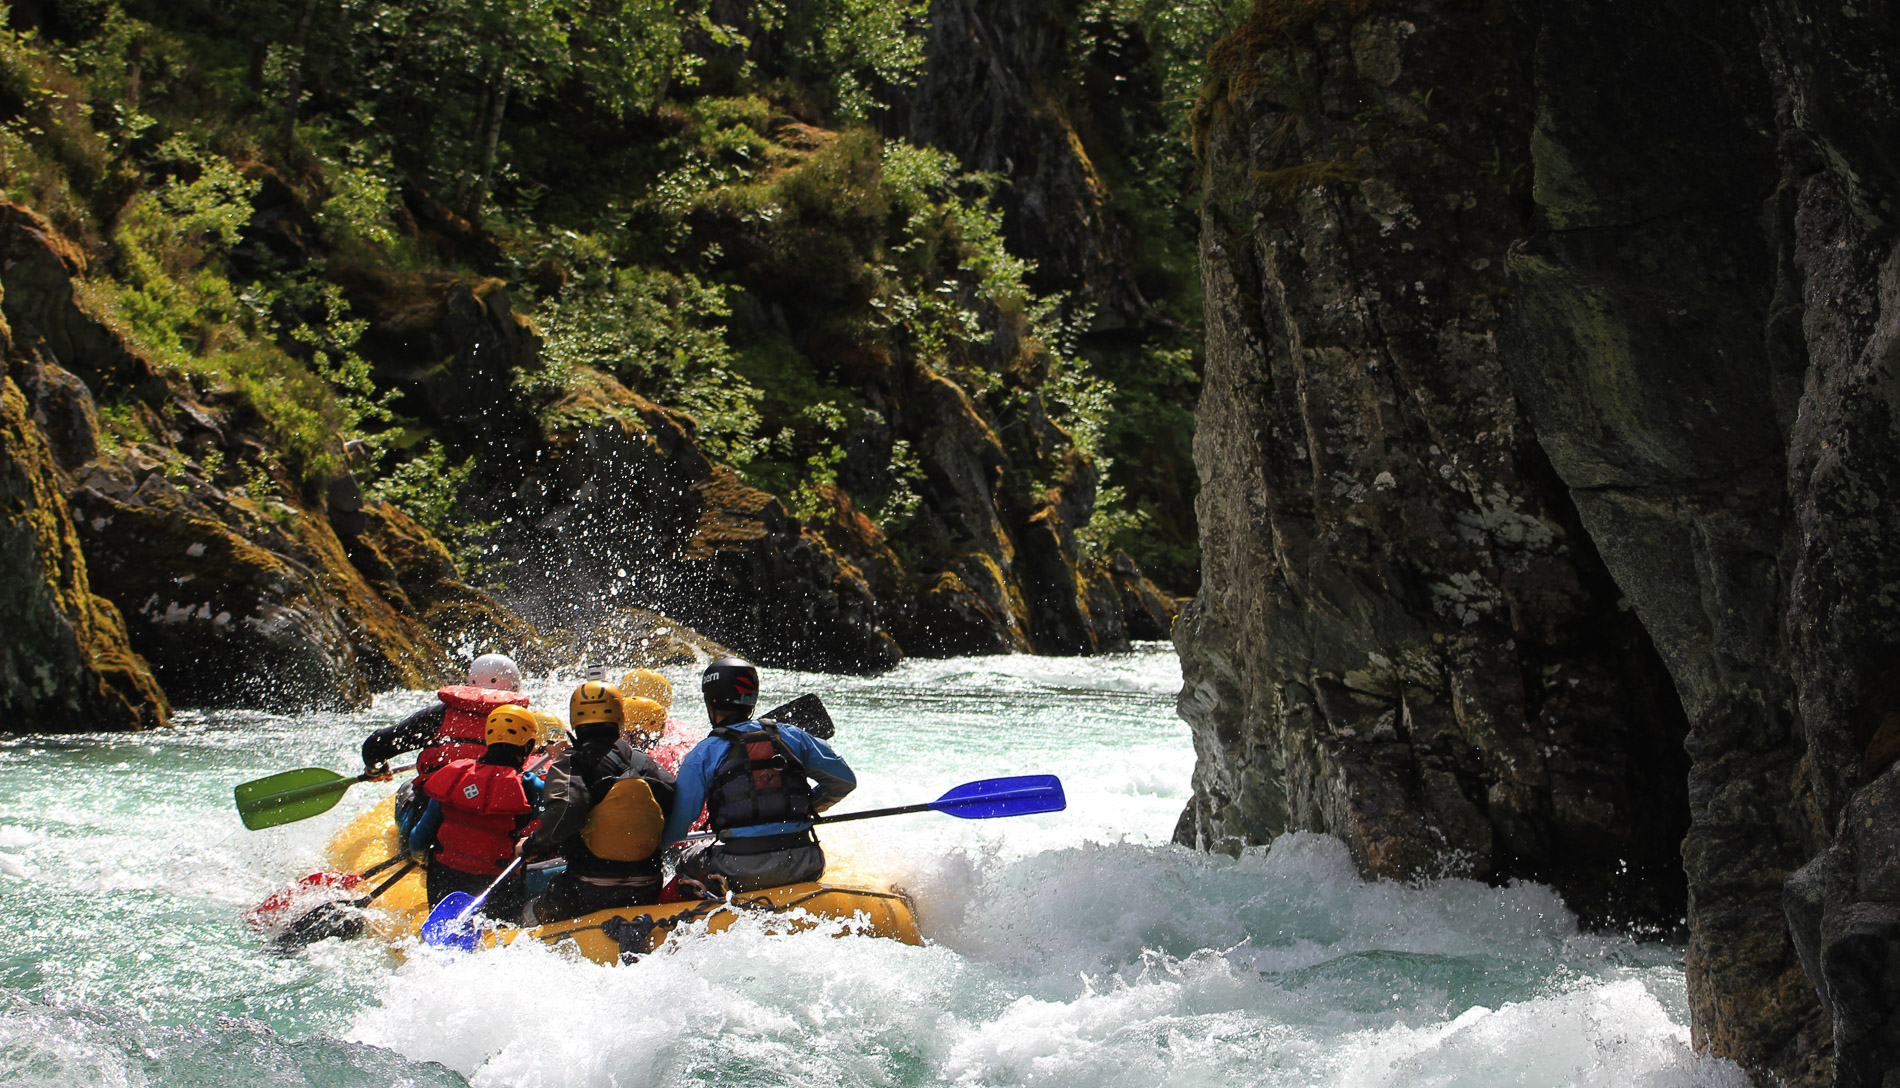 River rafting - activity provided by Uteguiden.